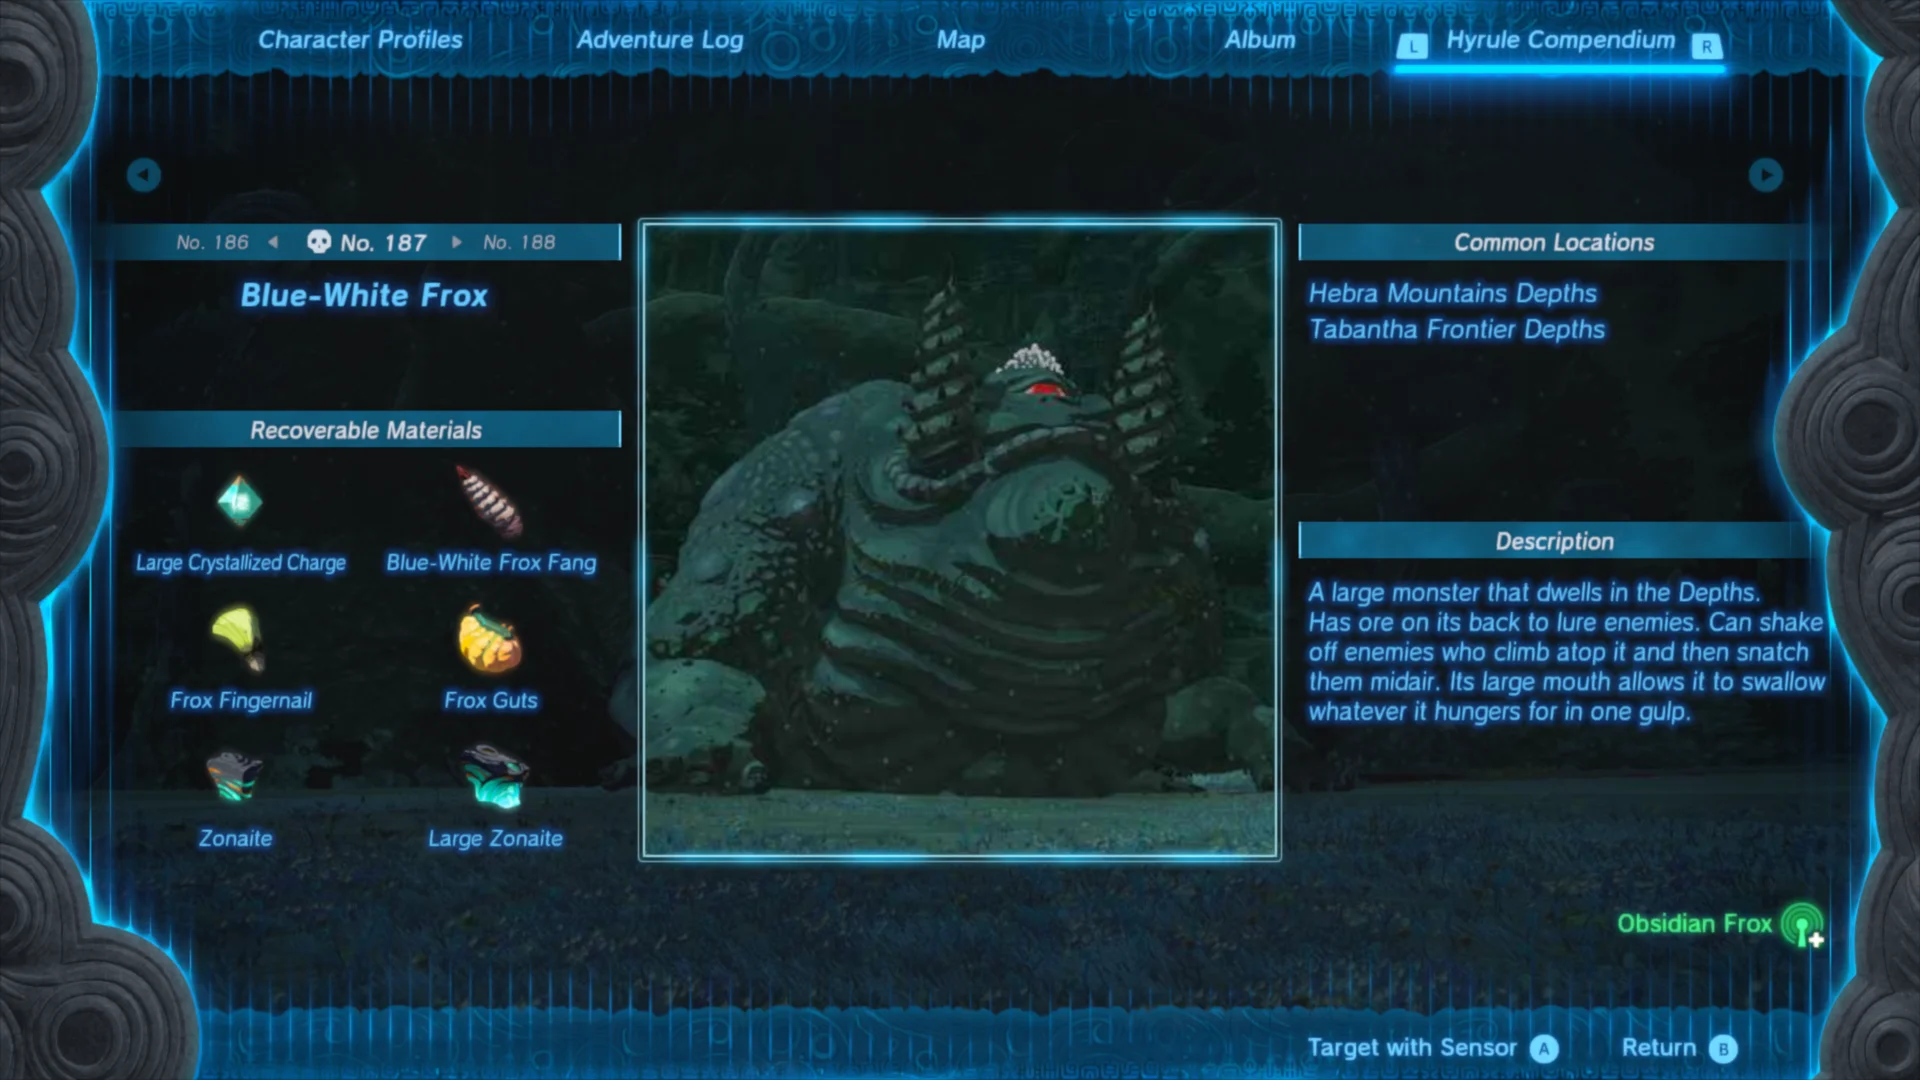 A menu displaying 'No. 187 Blue-White Frox' and featuring an image of the named monster alongside some flavor text, locations it can be found and crafting materials it drops when defeated.